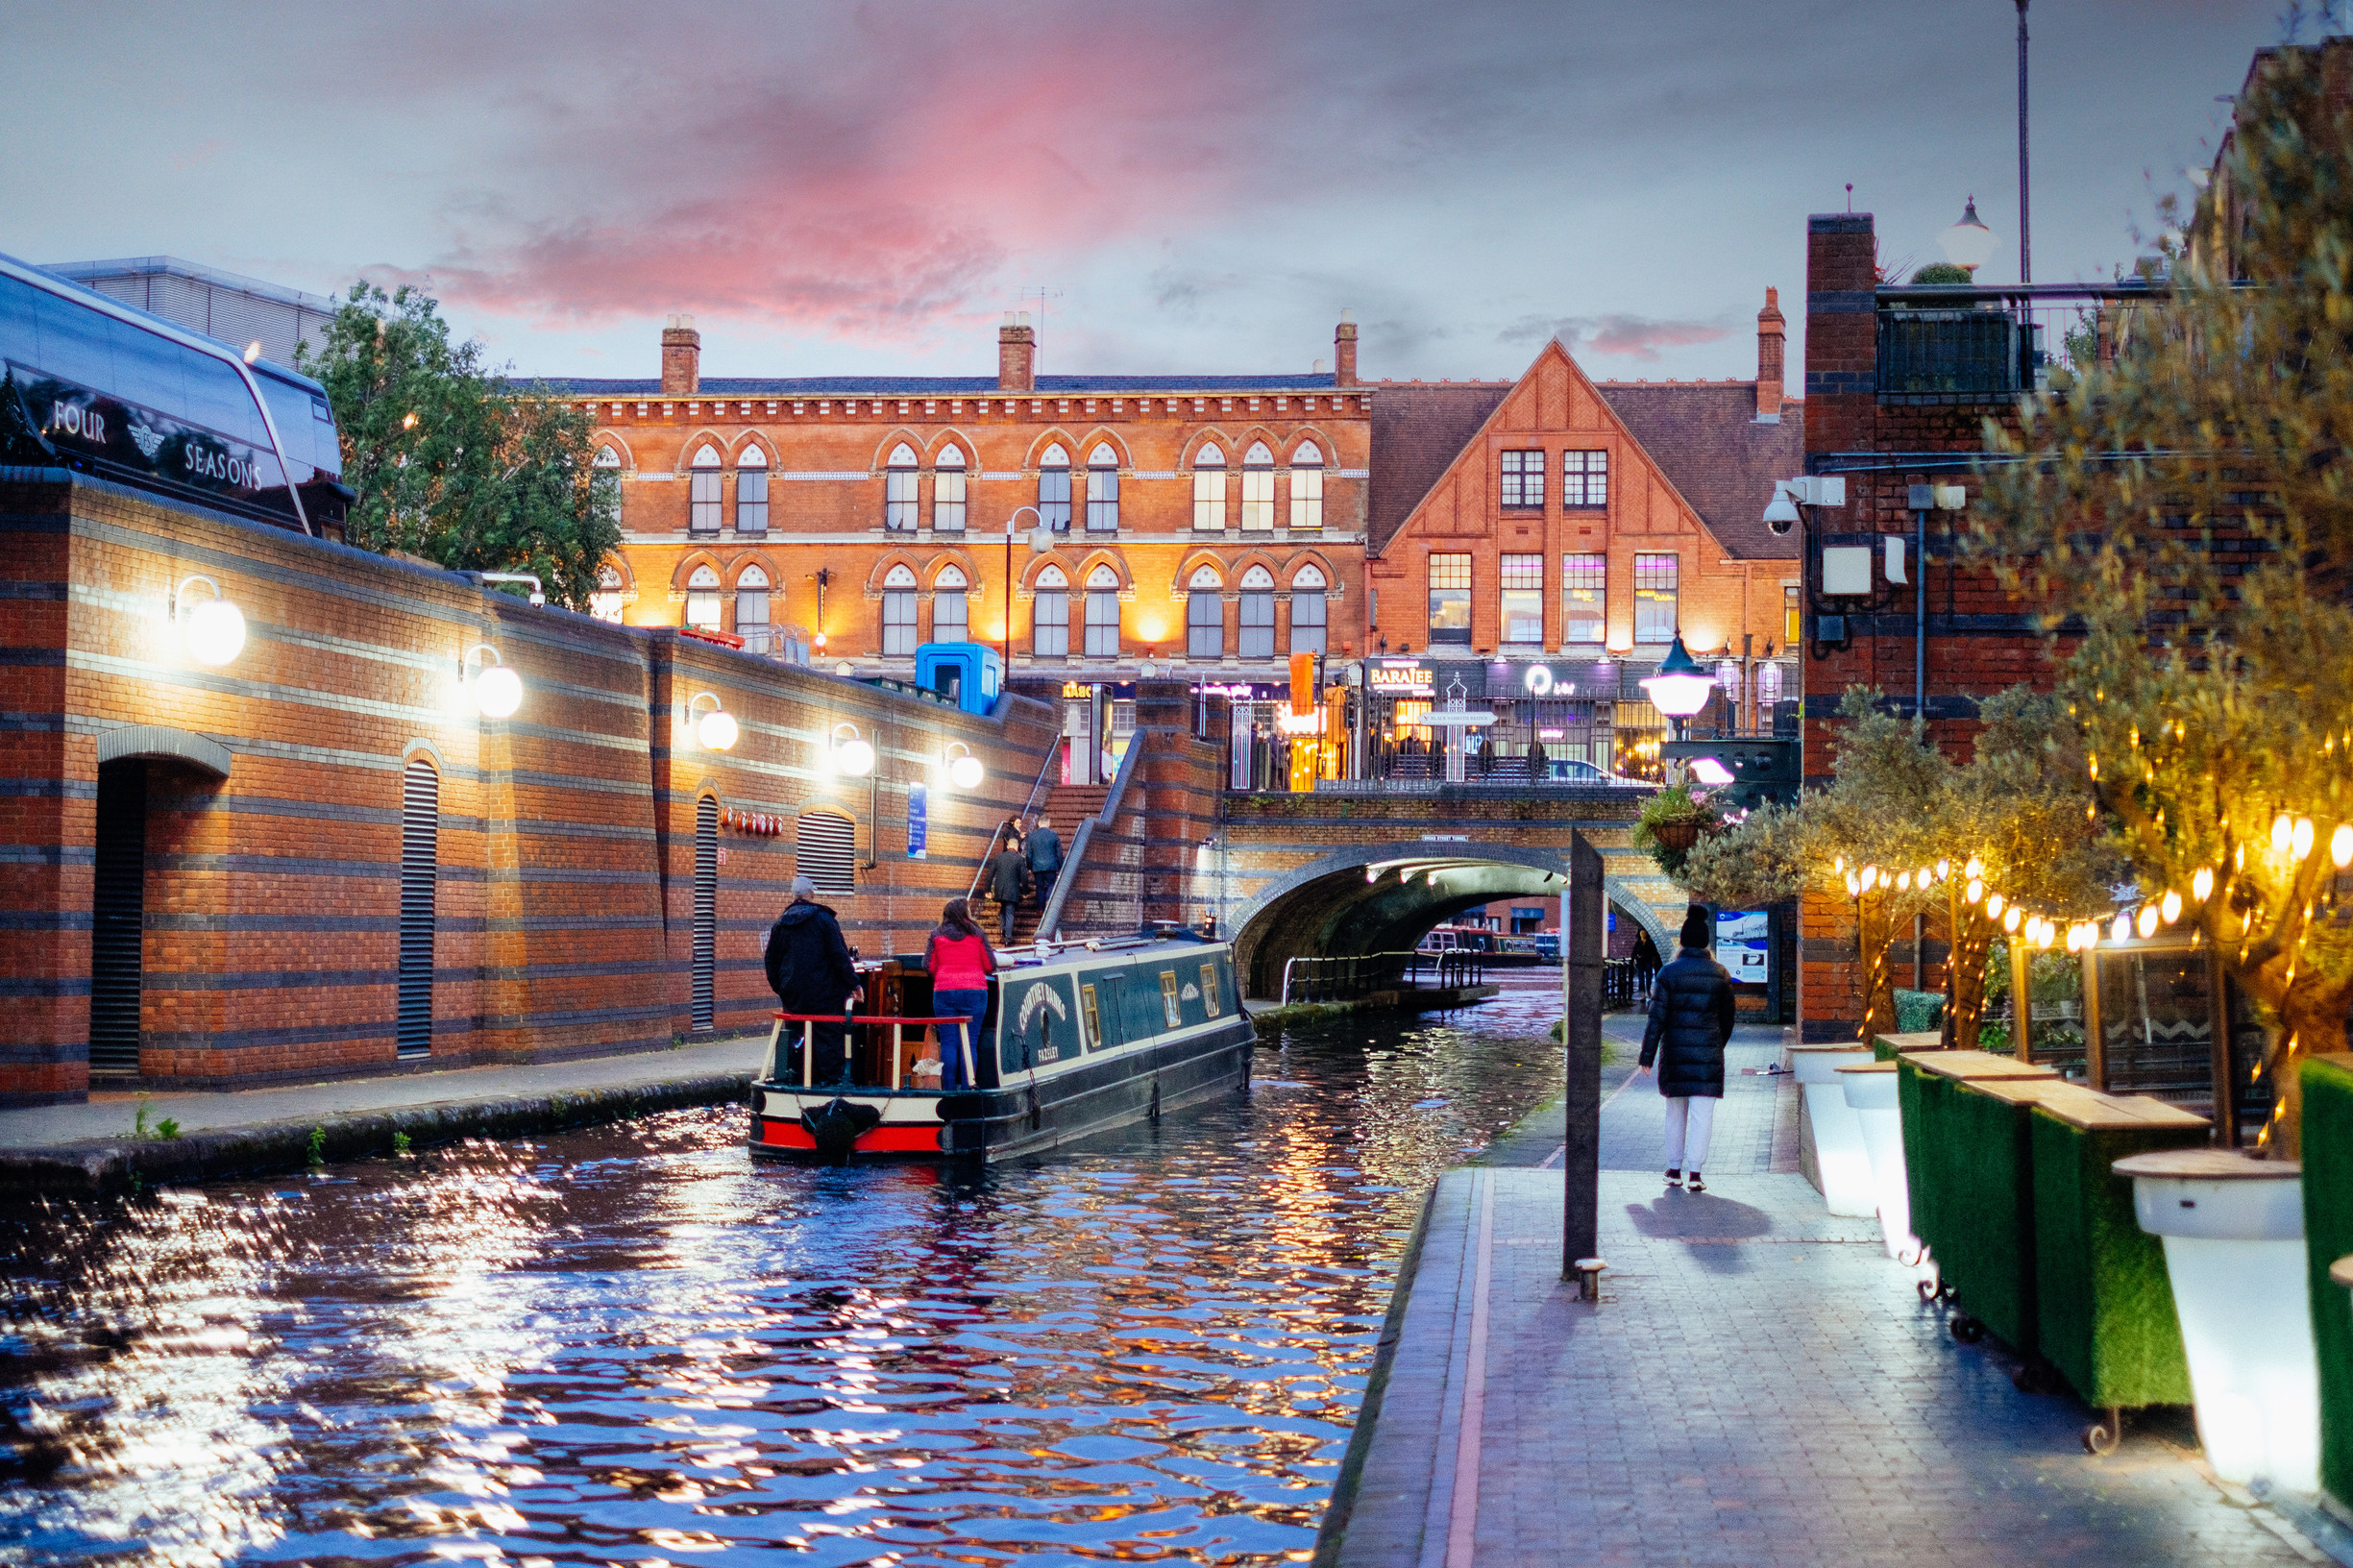 Riverboat on a canal. People walking down path on Brindley Place, Birmingham, England